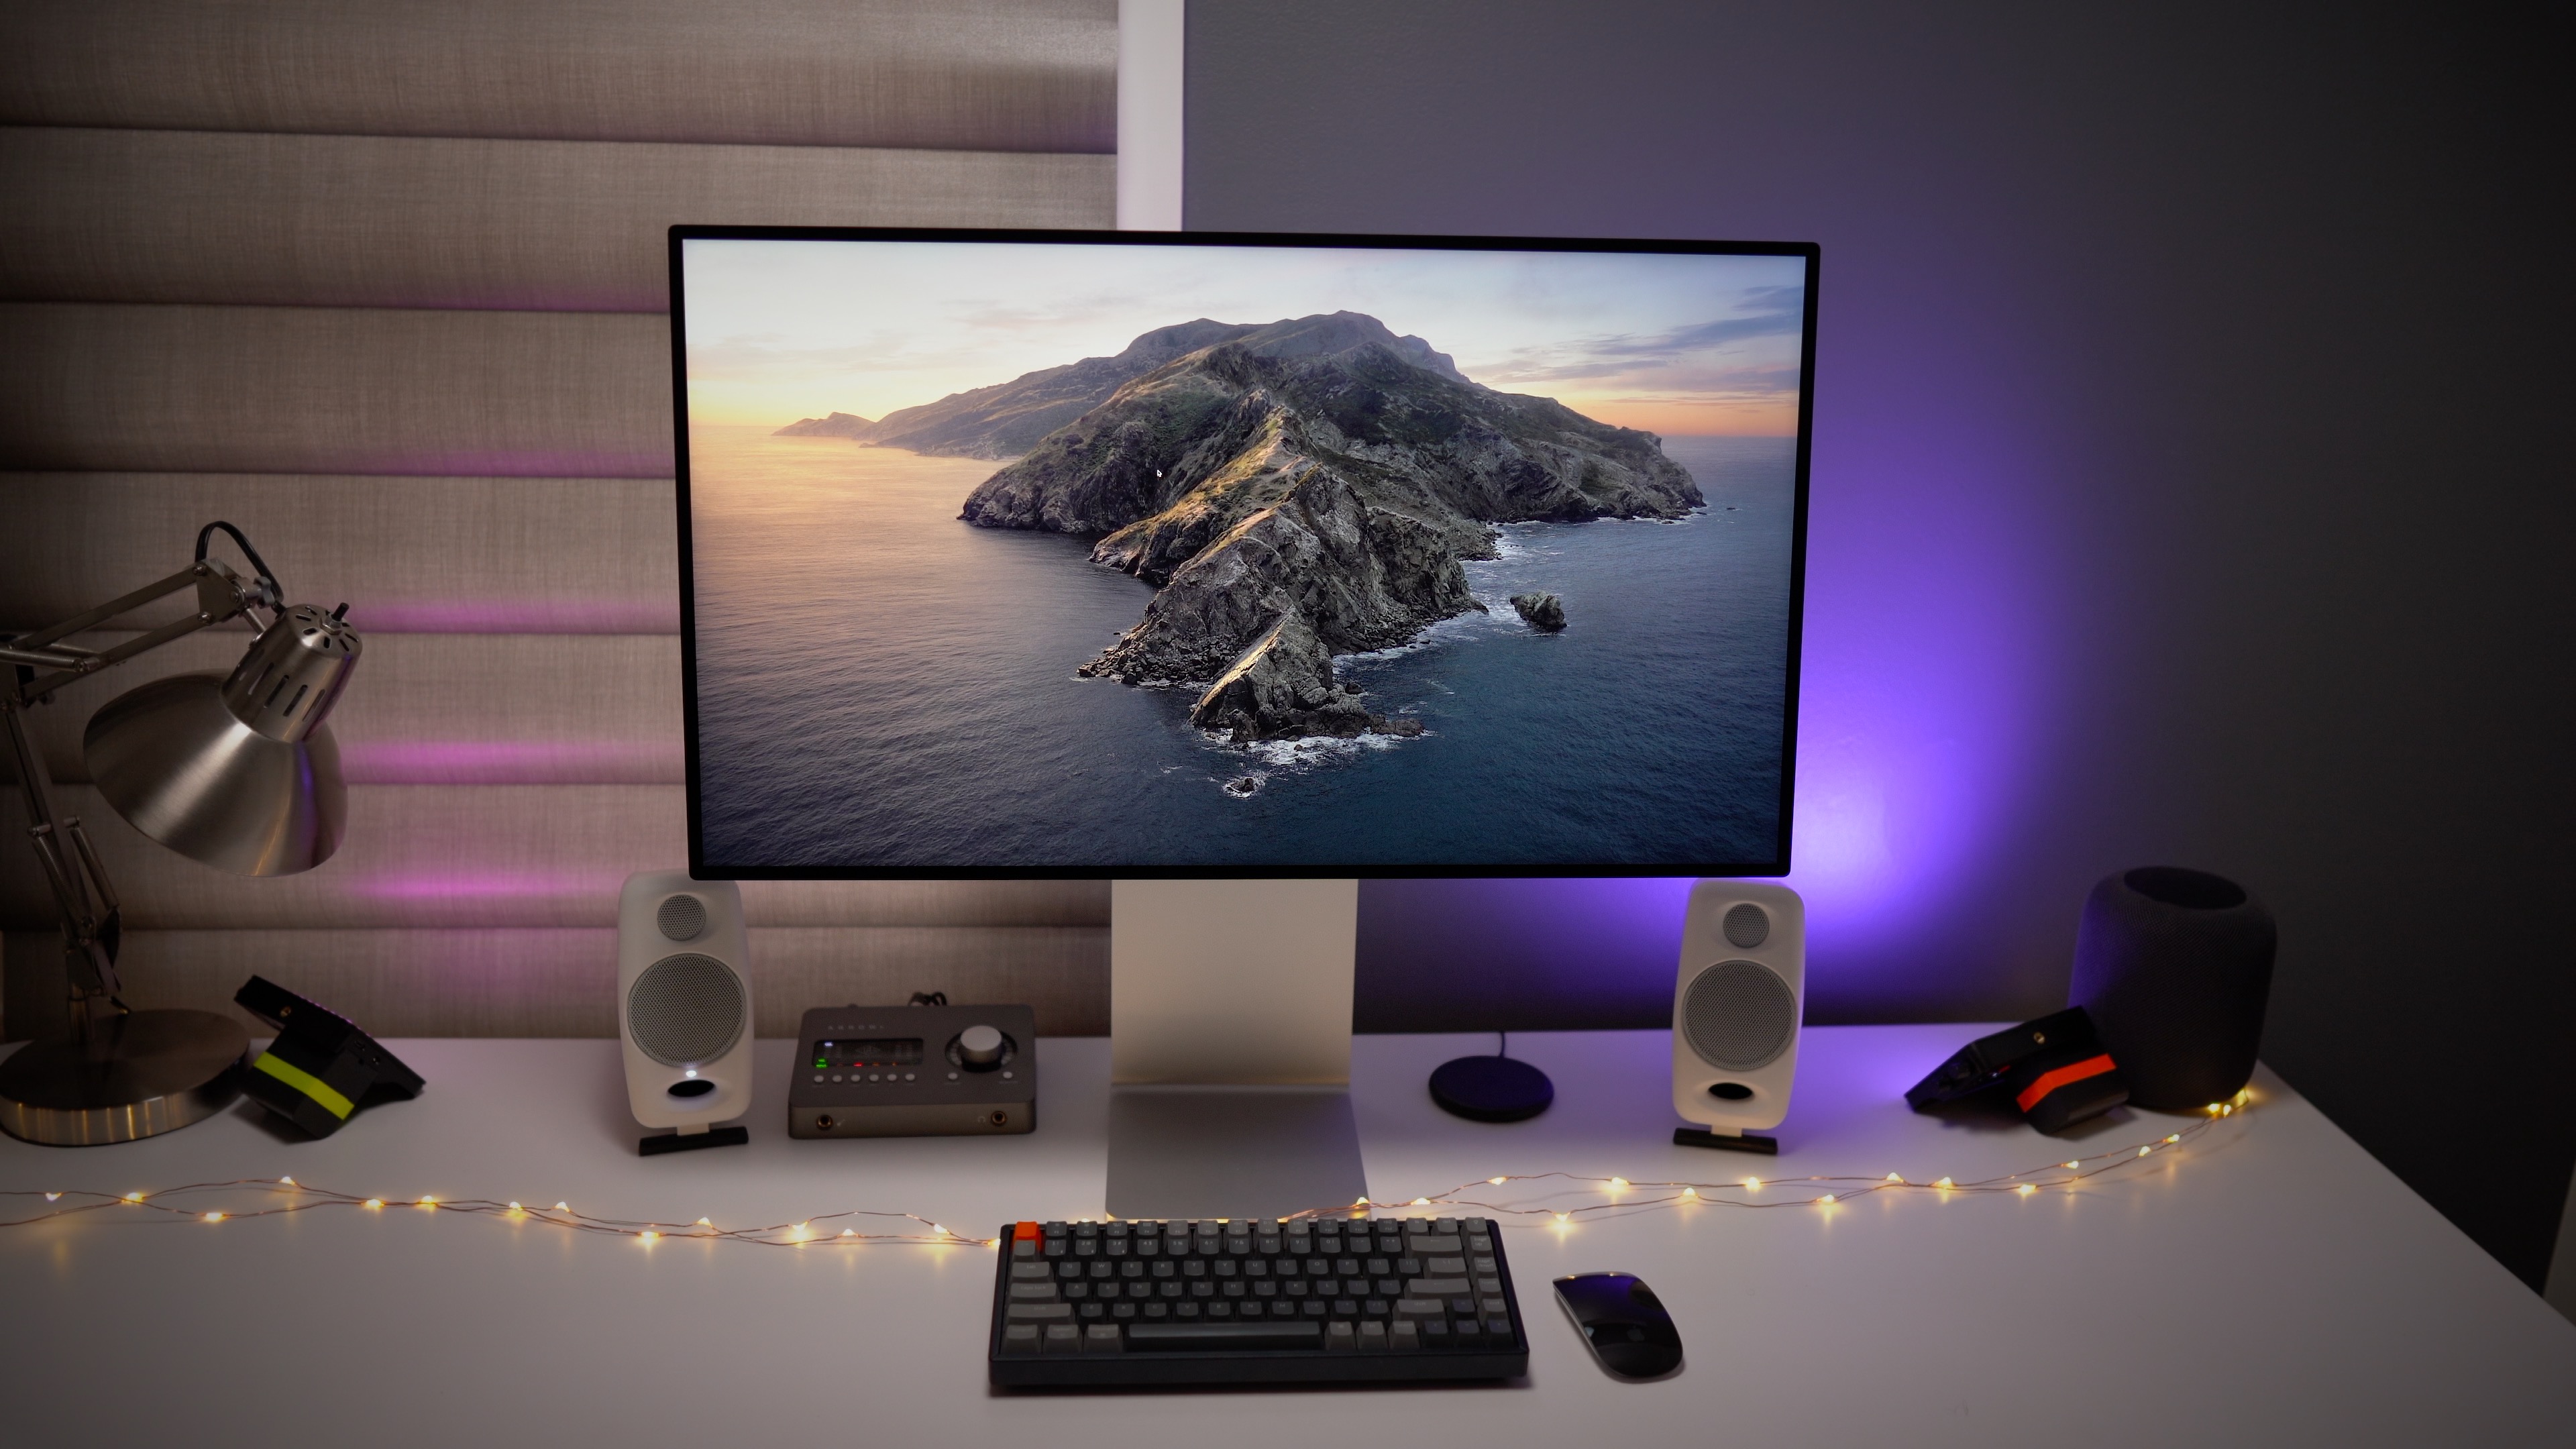 Leaker backs up Apple's Pro Display XDR with custom -